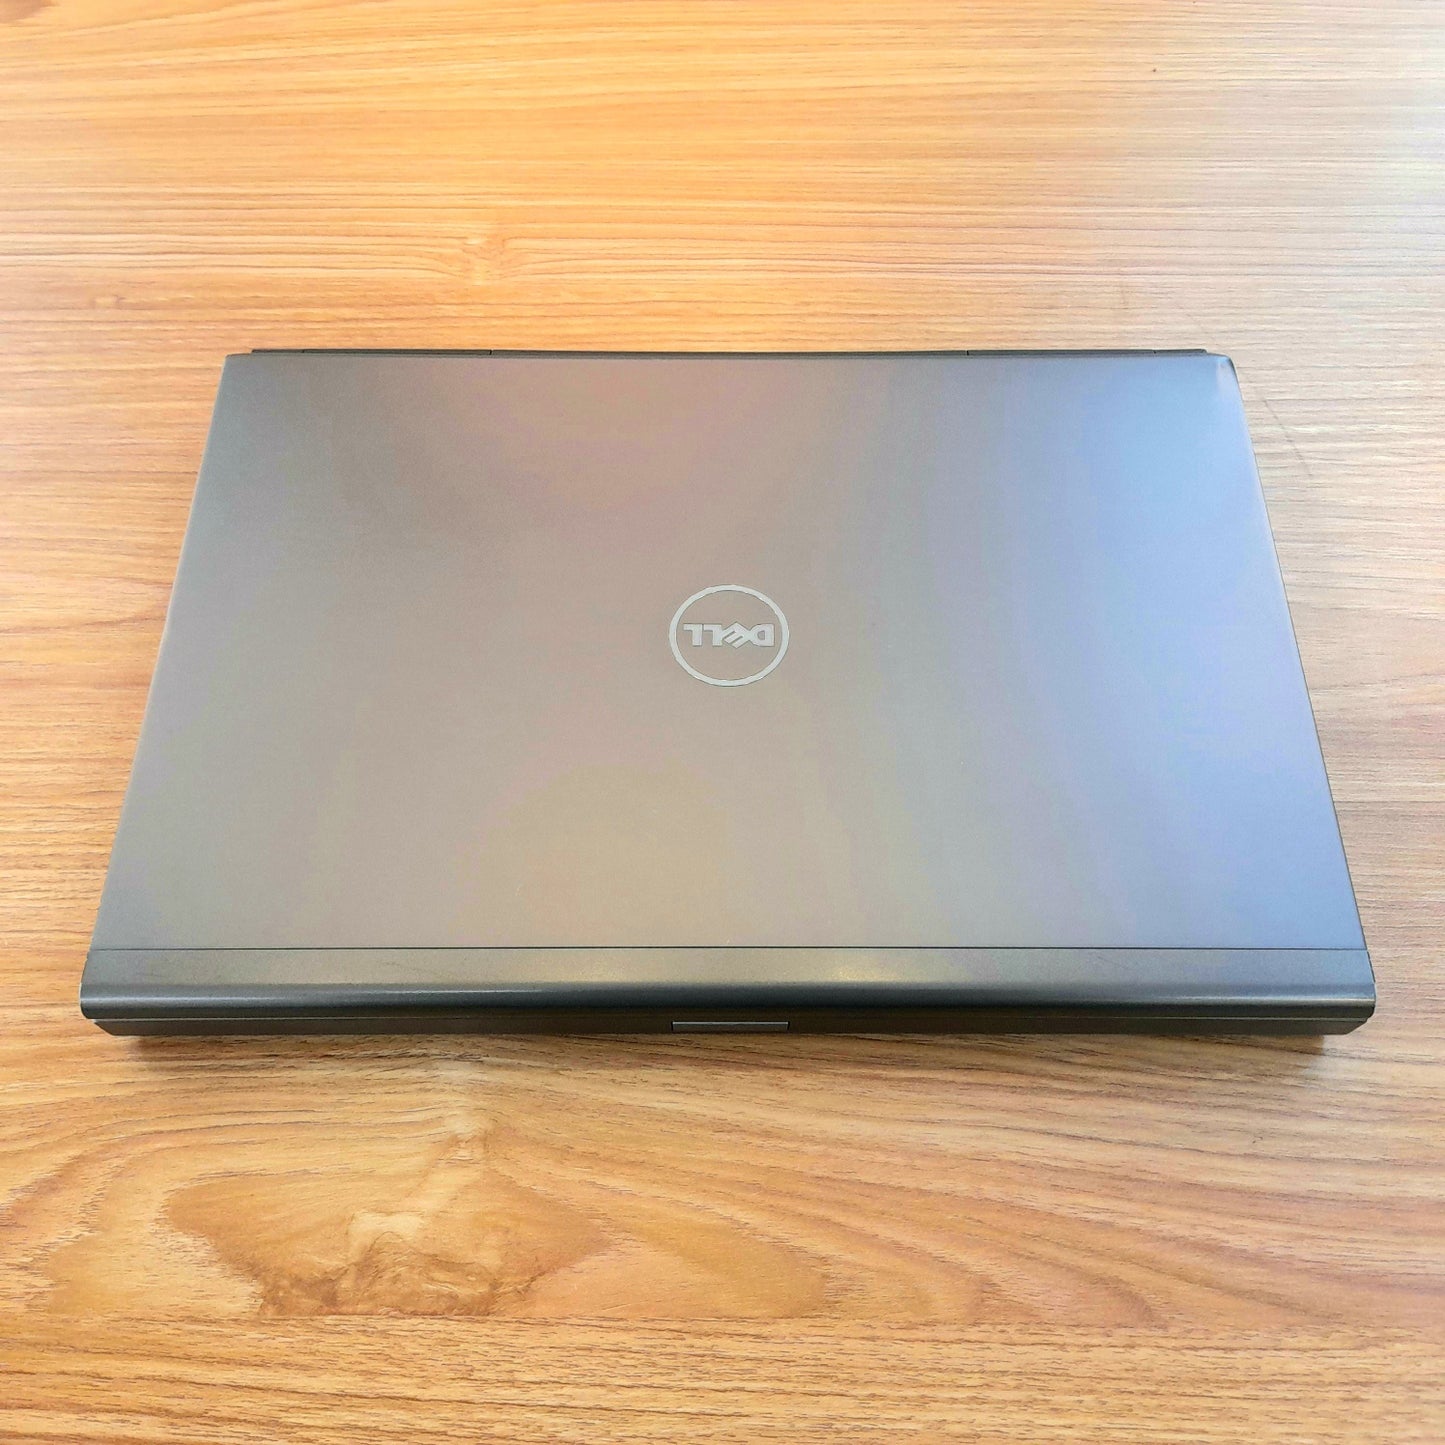 Dell Precision M4800 Laptop (Used Just Like New)